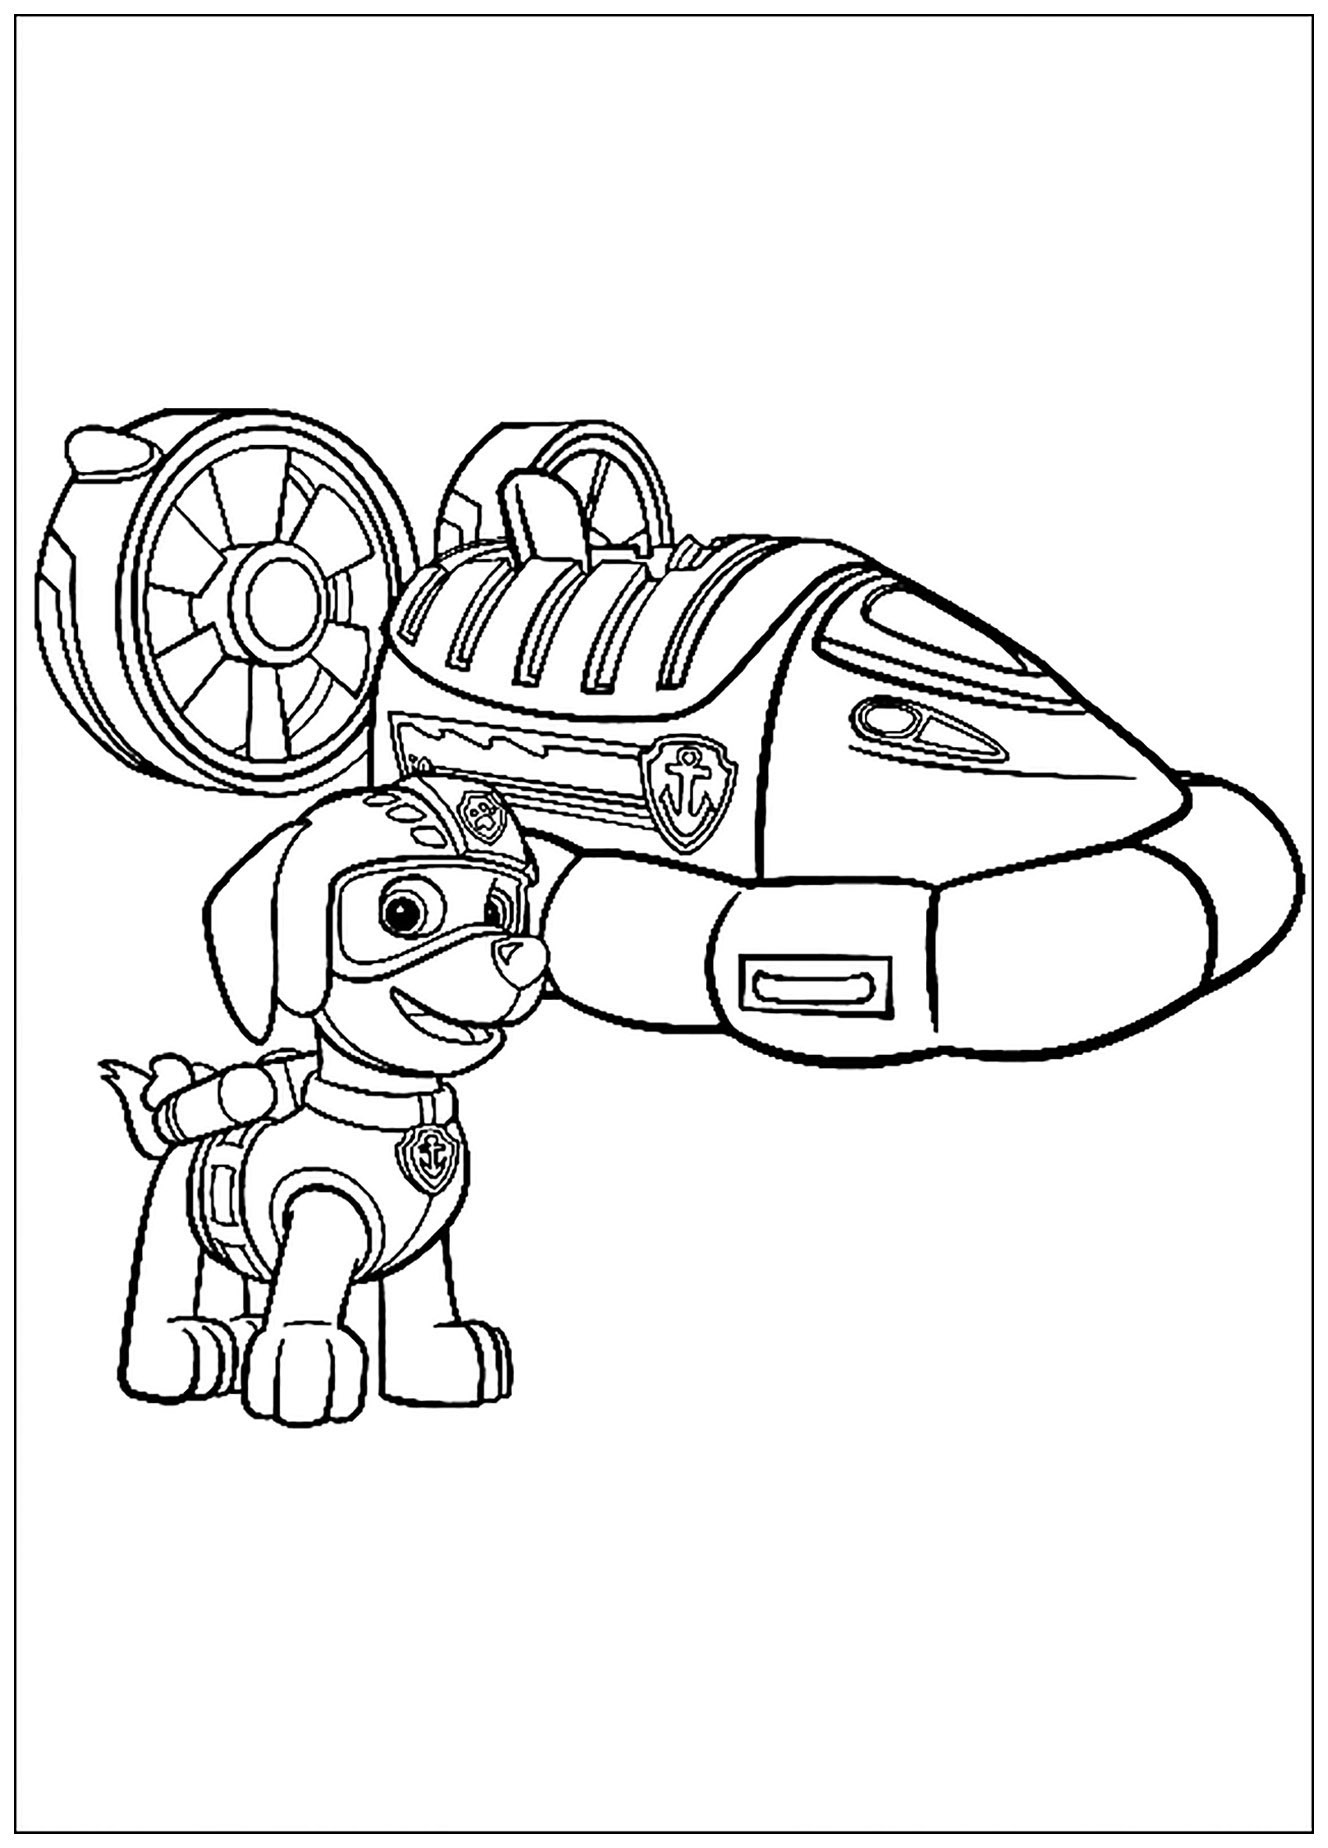 Paw Patrol Coloring Pages FREE Printable 98